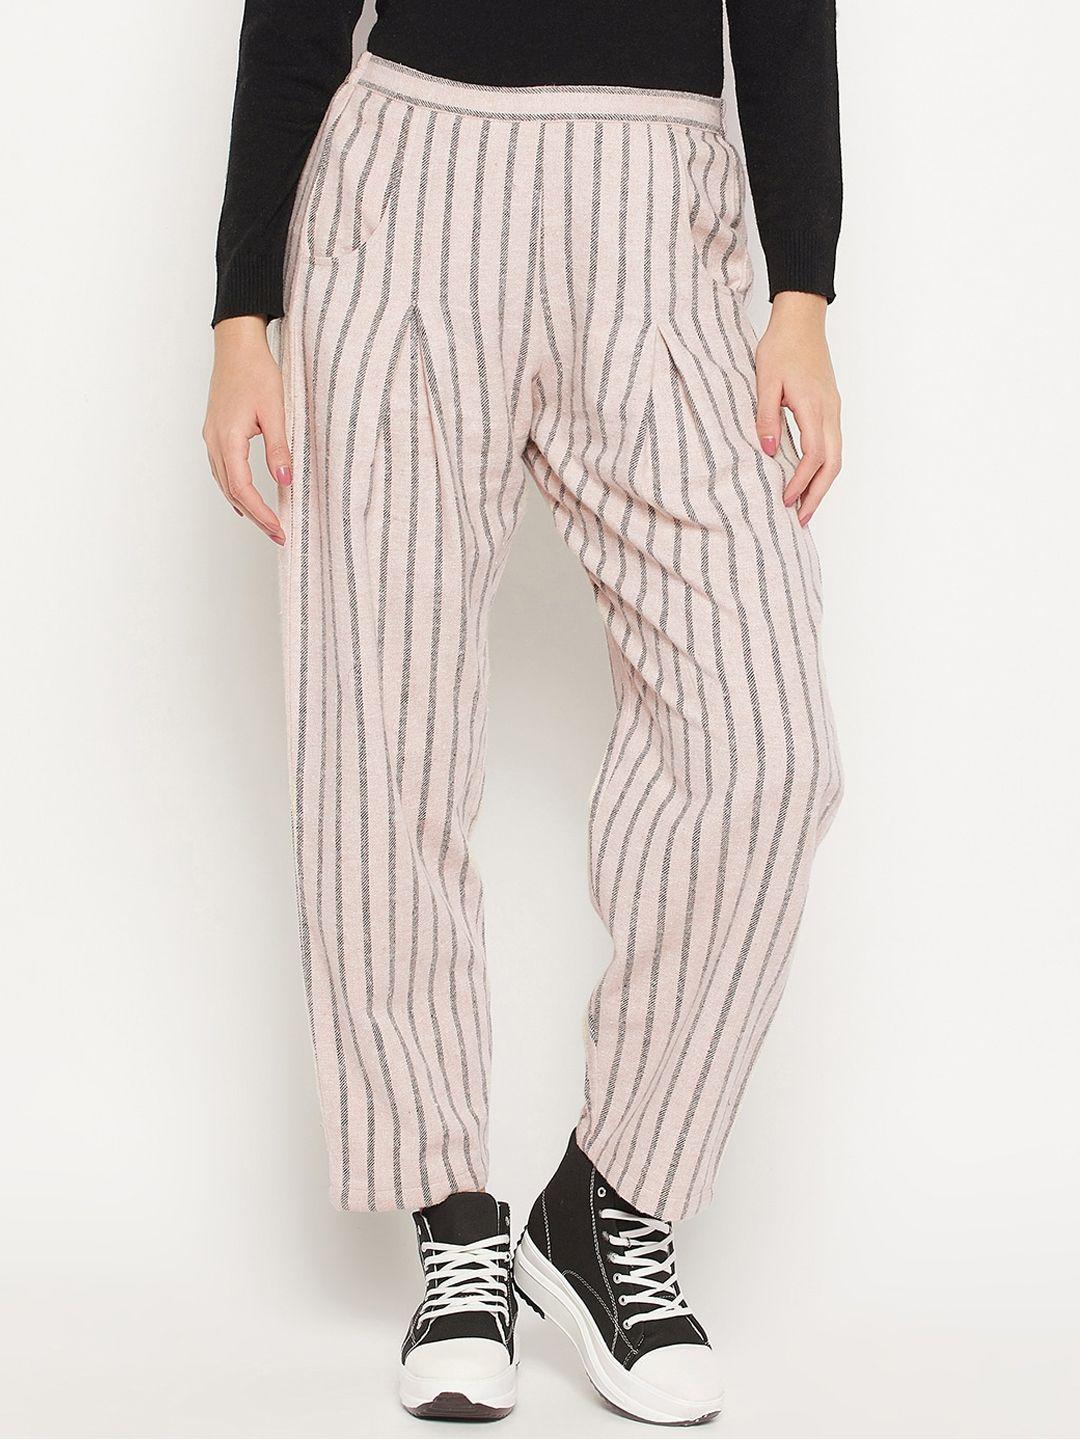 bitterlime-women-striped-relaxed-flared-wrinkle-free-pleated-cotton-trousers